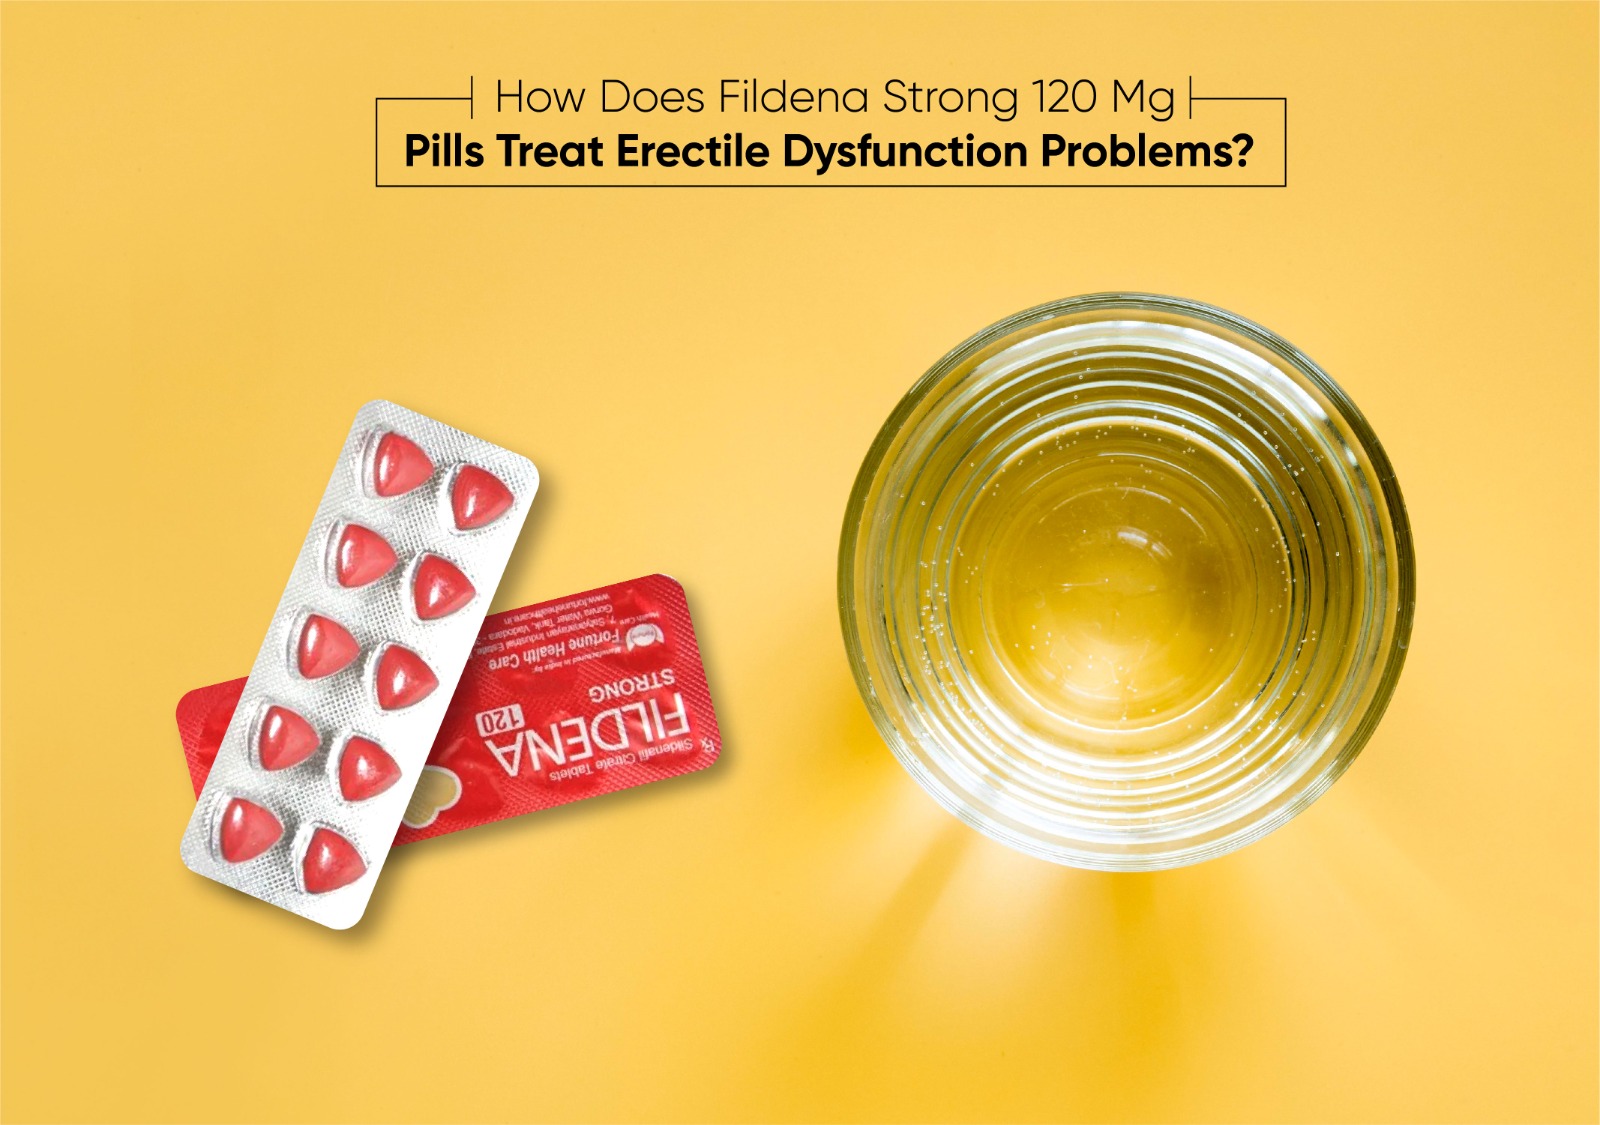 how-does-fildena-strong-120-mg-pills-treat-erectile-dysfunction-problems?